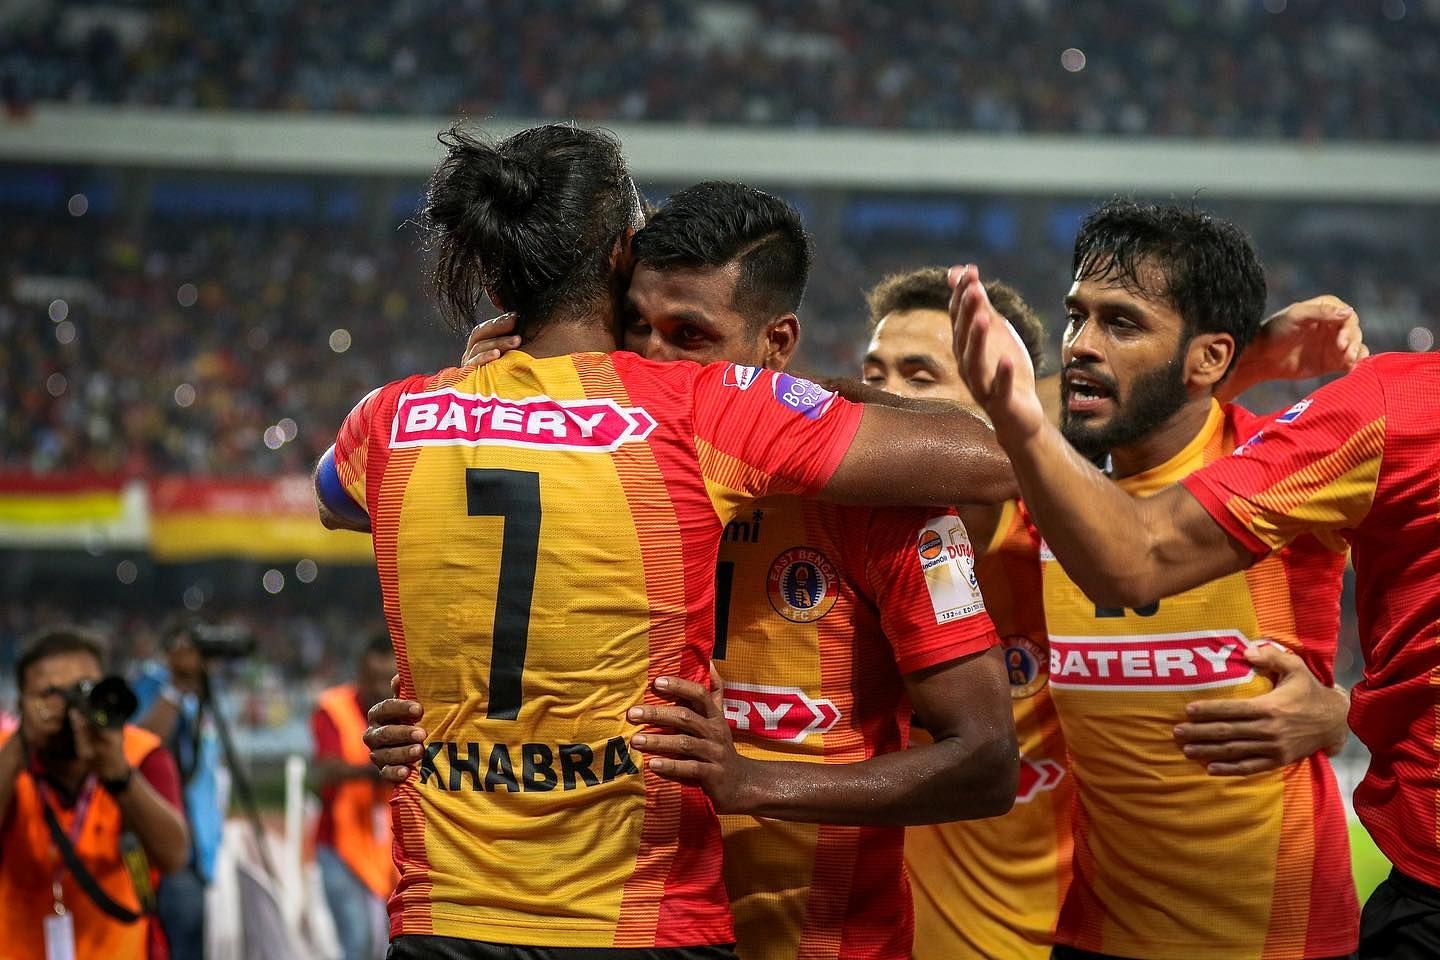 East Bengal Players celebrate after scoring the goal (Image courtesy: East Bengal SM)